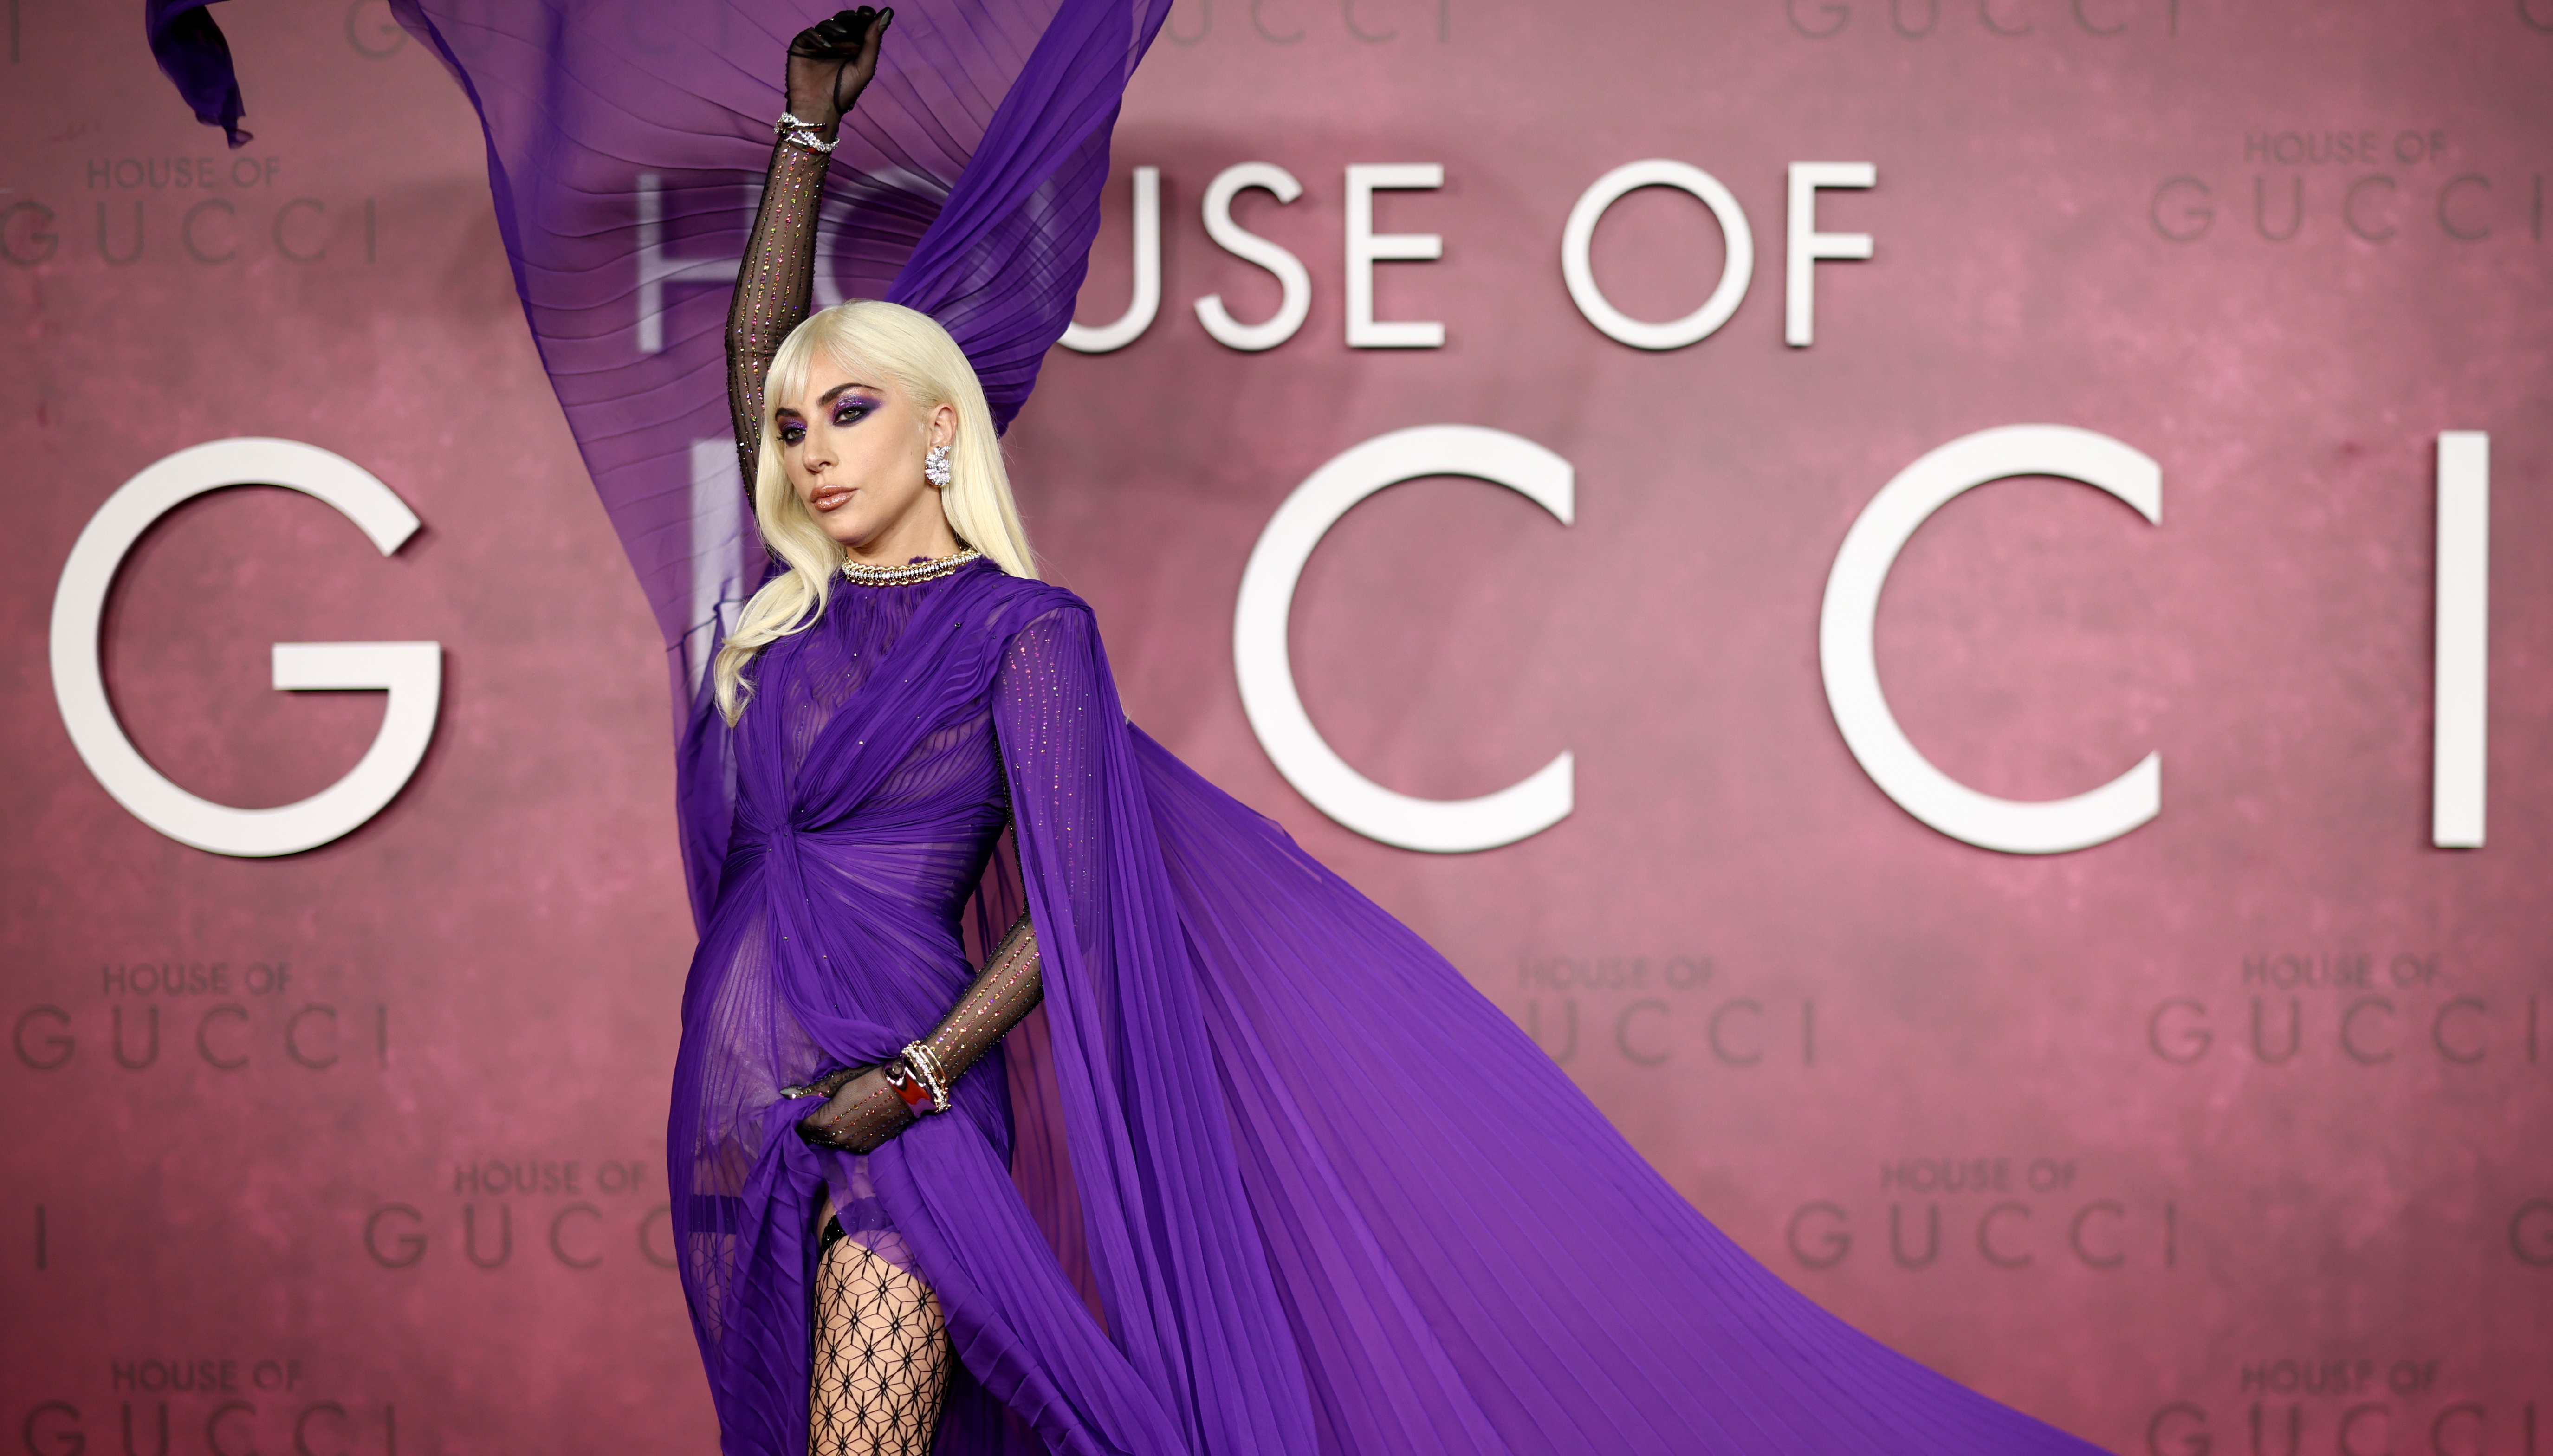 Cast member Lady Gaga arrives at the UK Premiere of the film 'House of Gucci' at Leicester Square in London, Britain, November 9, 2021.